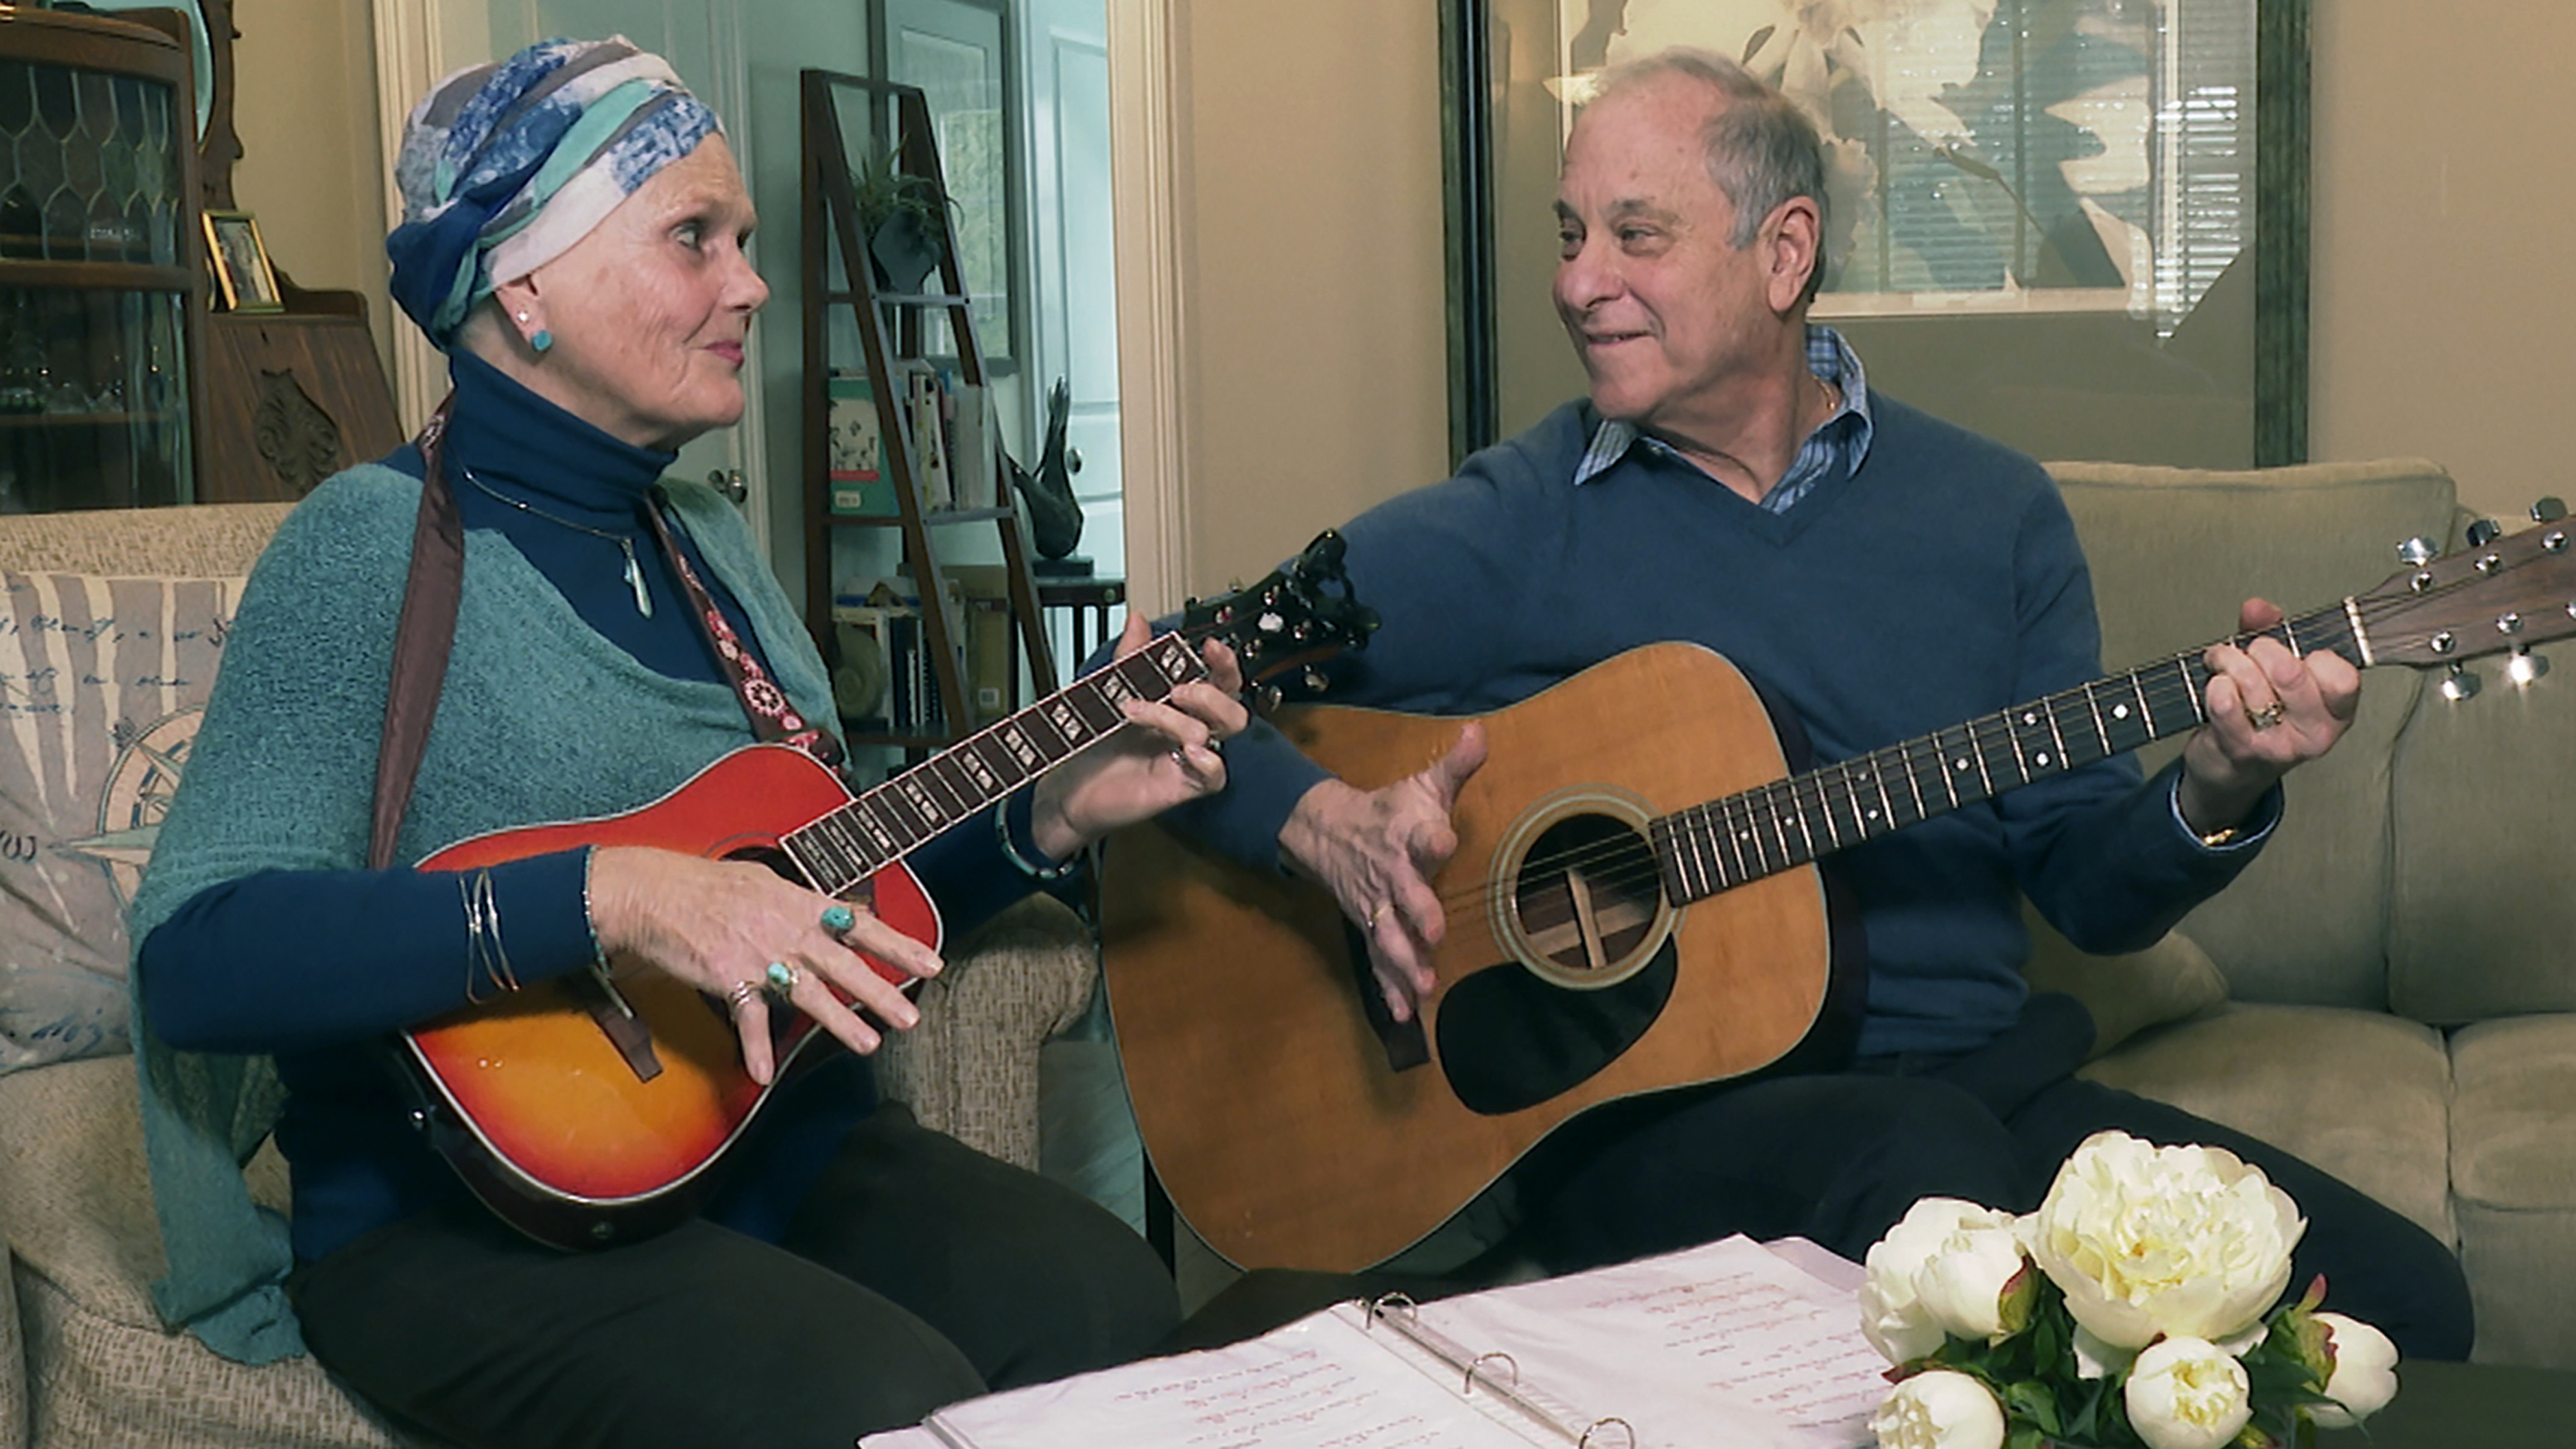 Lynda Shannon Bluestein, left, jams with her husband Paul in the living room of their home, Feb. 28, 2023, in Bridgeport, Conn. (AP Photo/Rodrique Ngowi))